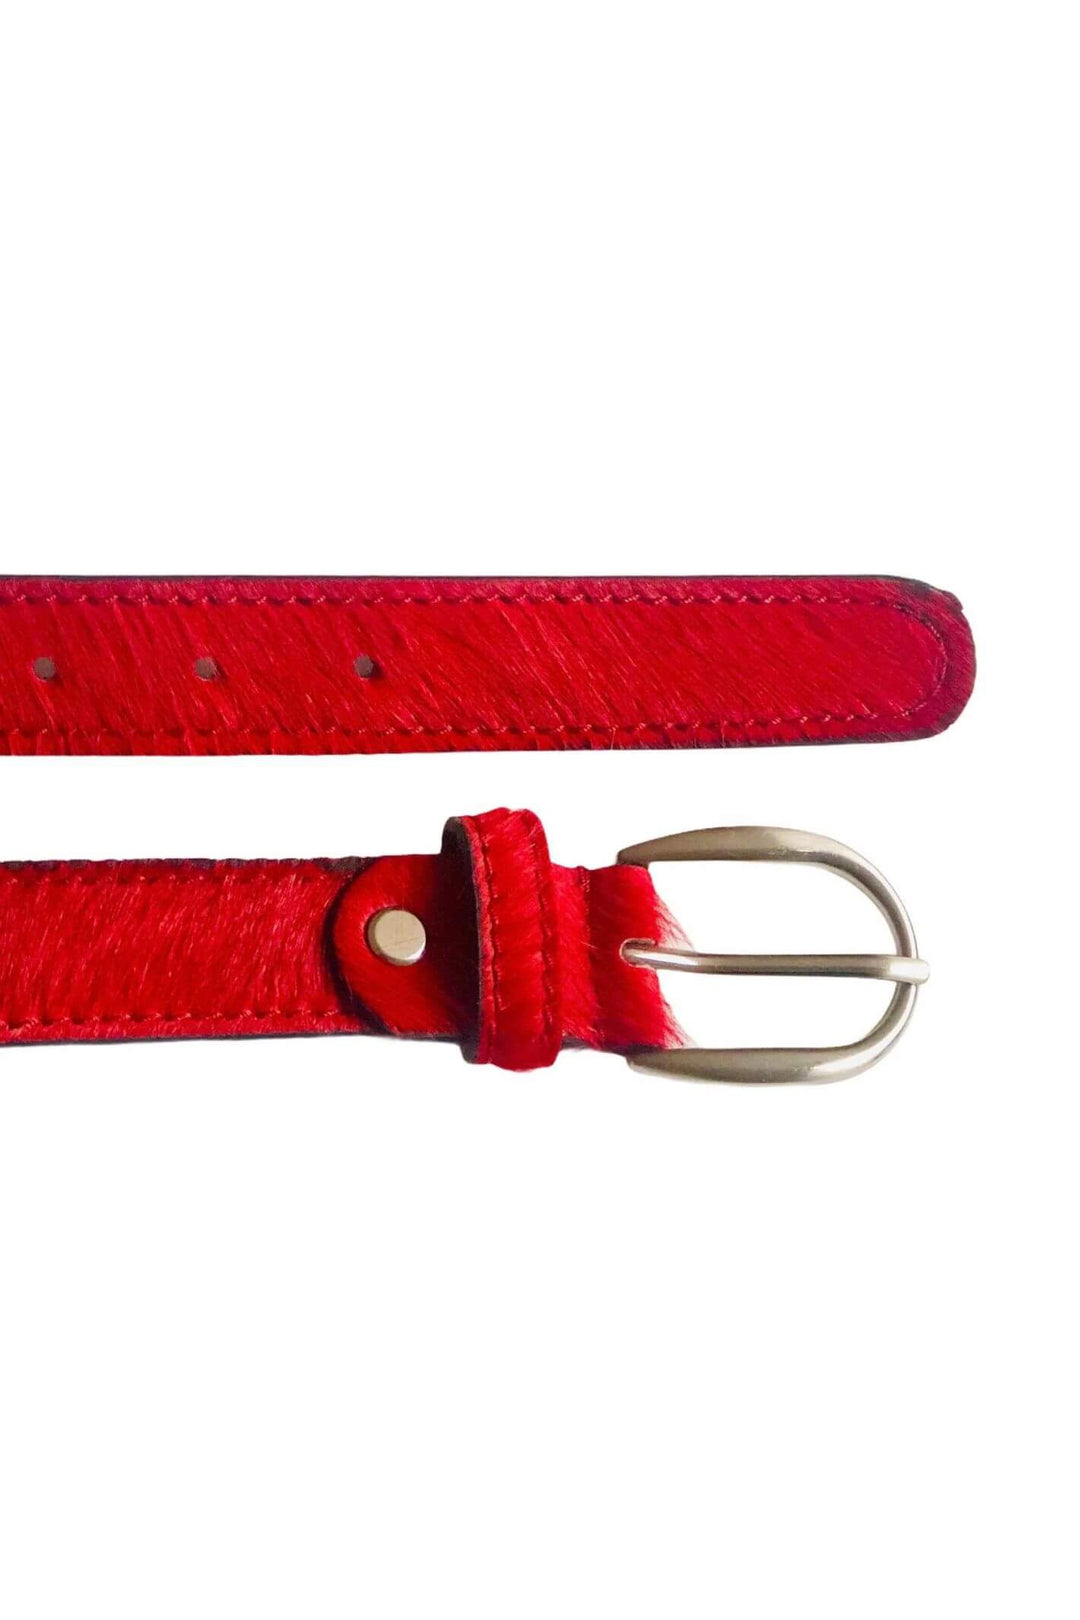 Hydestyle London Red Pony Hair Leather Belt